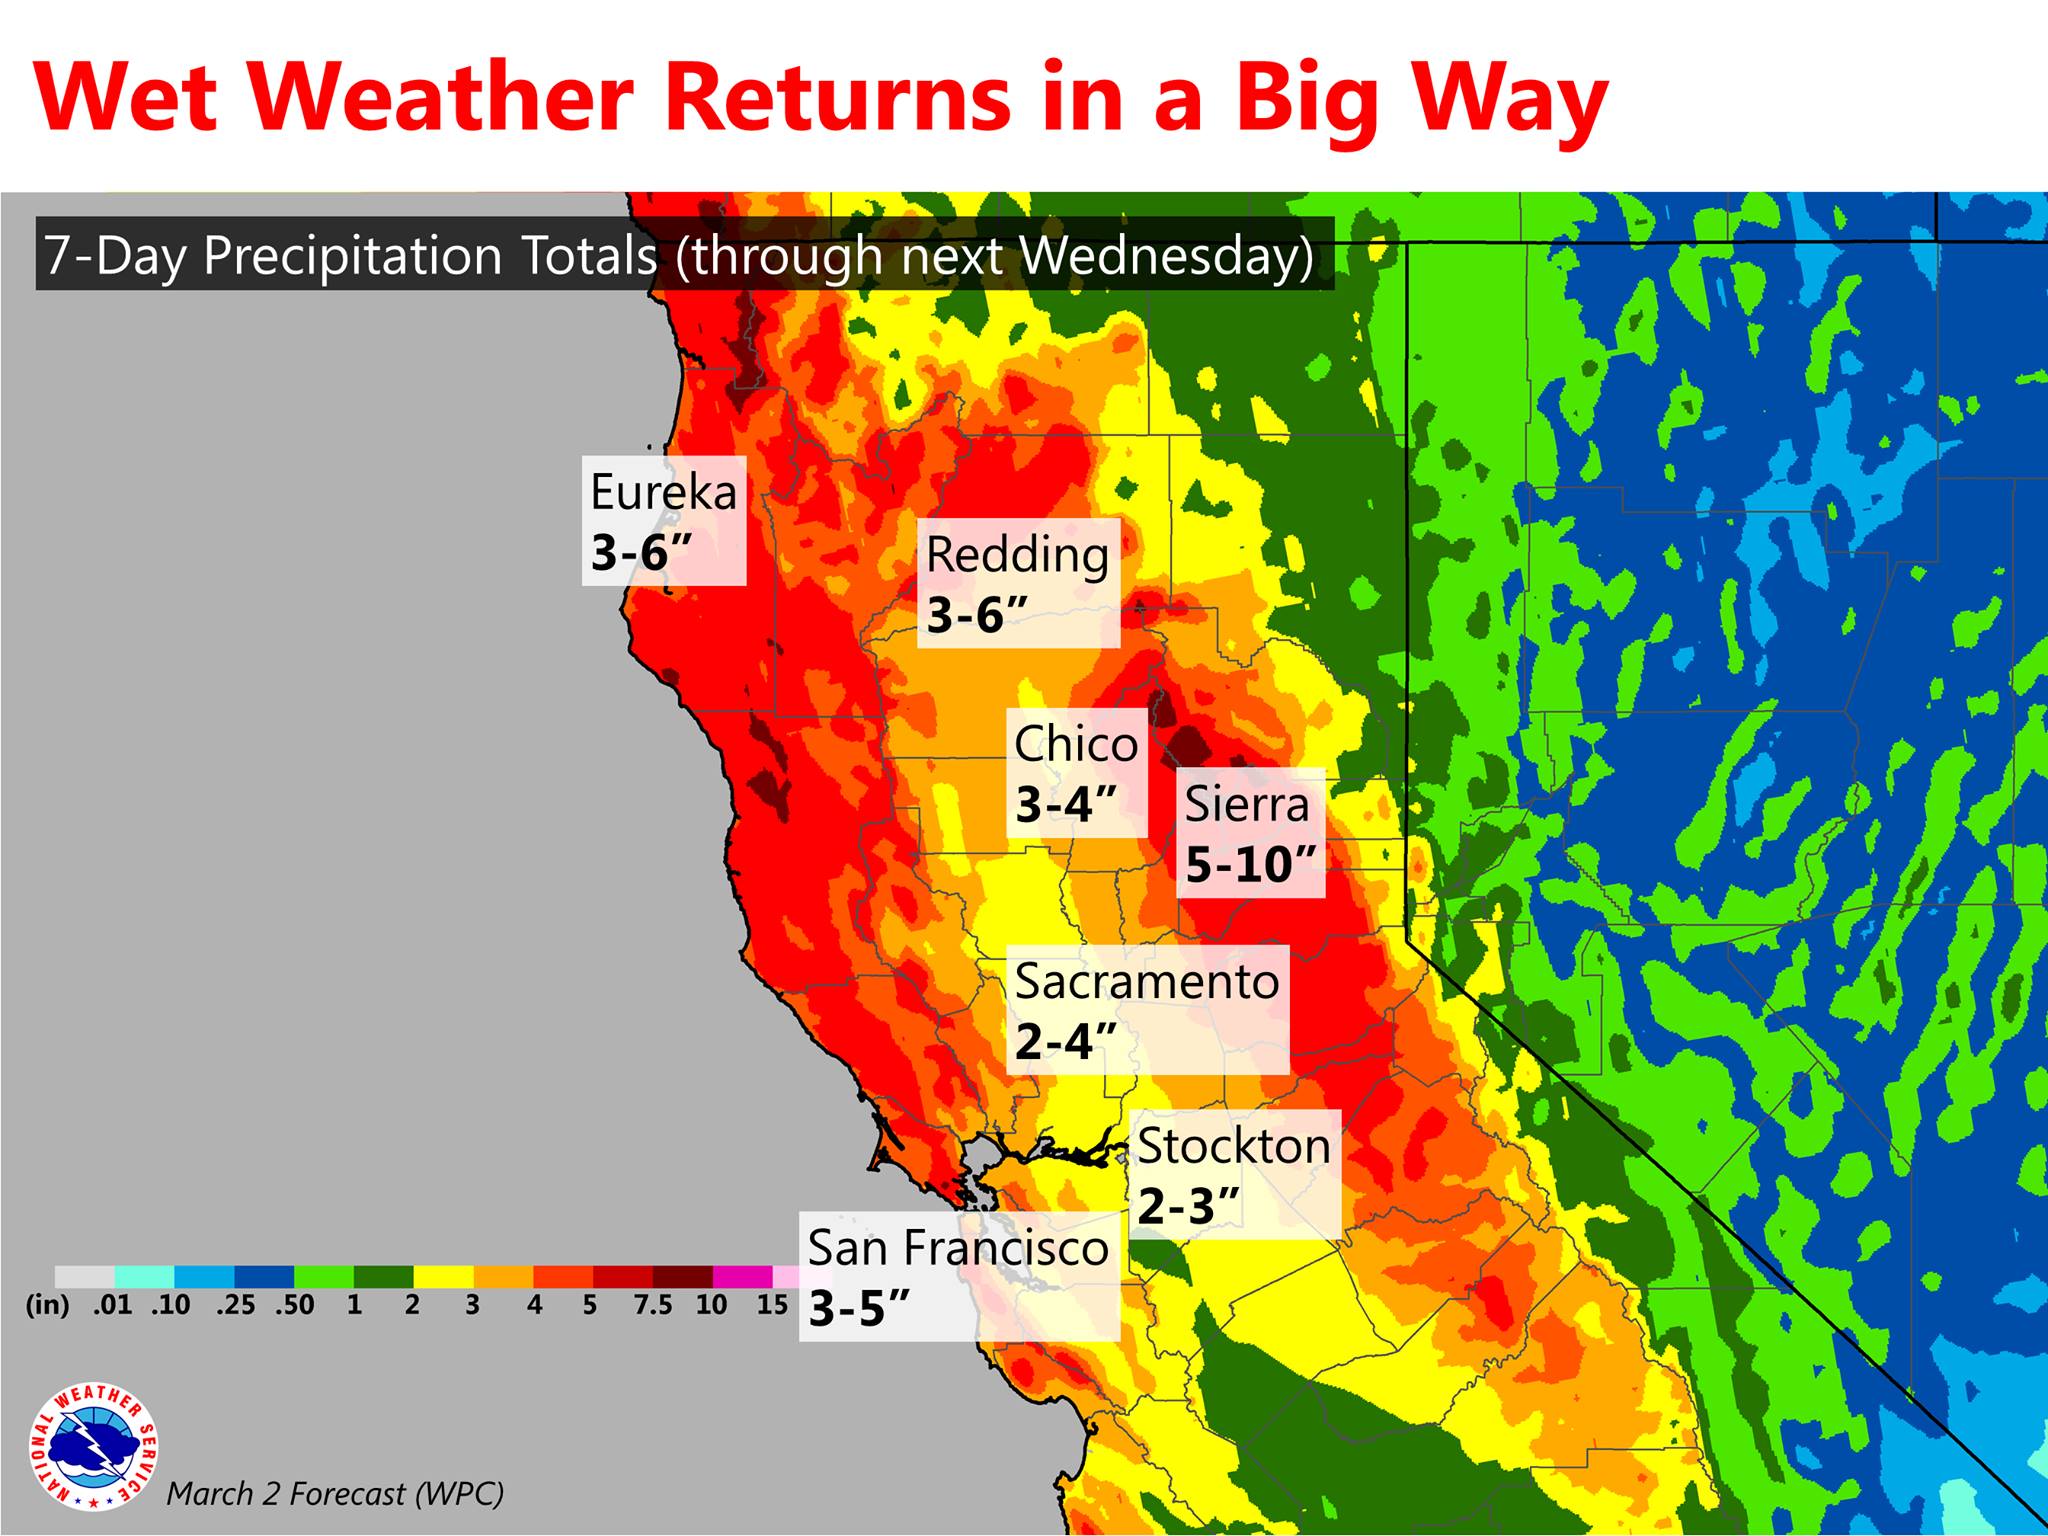 " Here's an early look at the forecast precipitation totals for Northern California! Potentially 5 to 10 inches of rain will be possible across the interior mountains, with 2 to 6 inches for the lower elevations. The heaviest precipitation will arrive on Saturday, but periods of light to moderate precipitation are likely between Thursday and Monday." - NOAA Sacramento, CA today